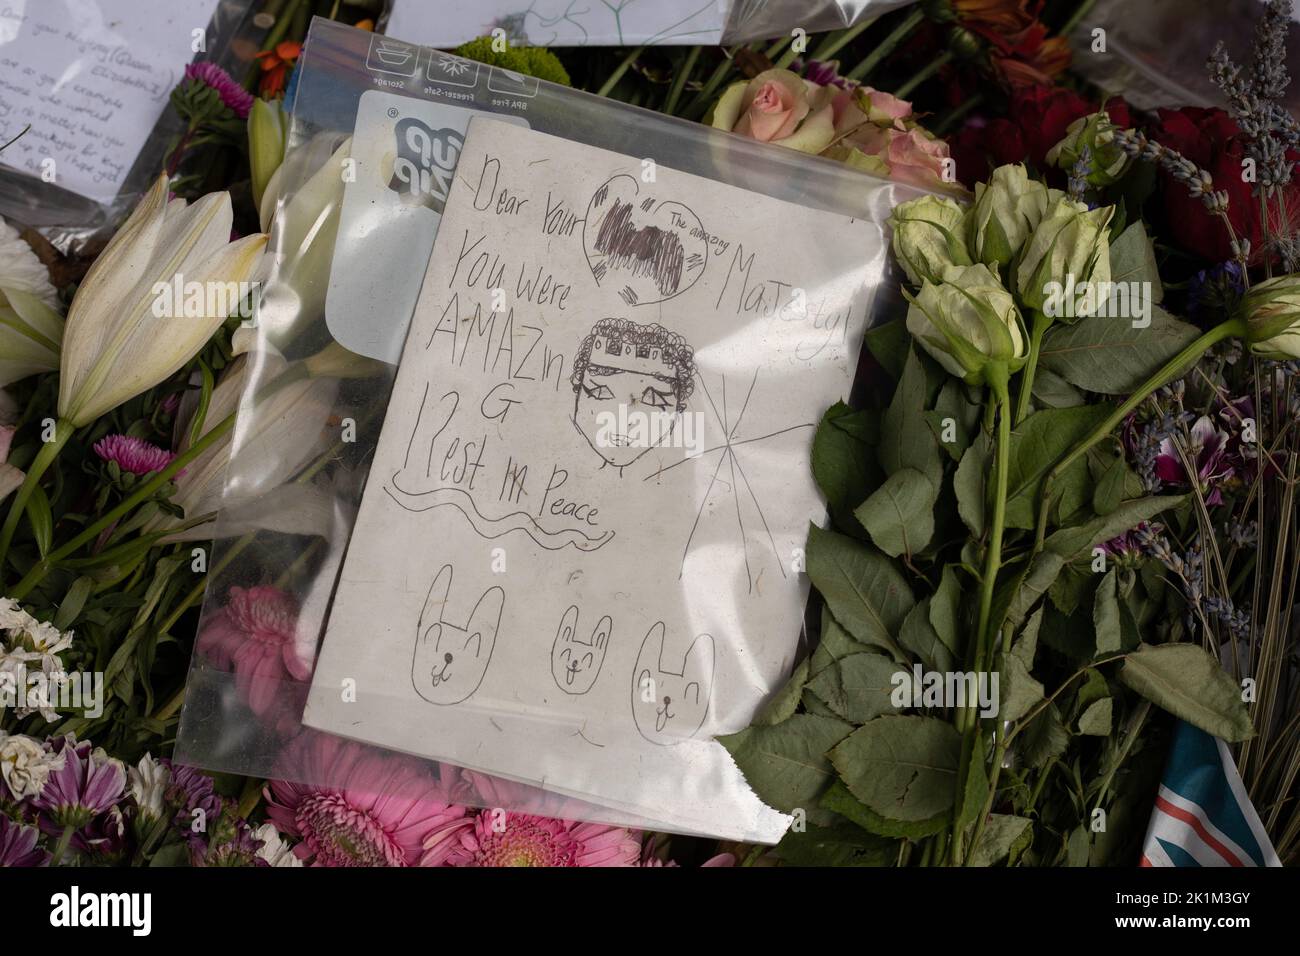 Edinburgh Scotland, 19 September 2022. Flowers, letters and gifts laid by the public as a mark of respect for Her Majesty Queen Elizabeth II who died on 8th September, in the gardens of Palace of Holyroodhouse, in Edinburgh Scotland, 19 September 2022. Photo credit: Jeremy Sutton-Hibbert/Alamy Live News. Stock Photo